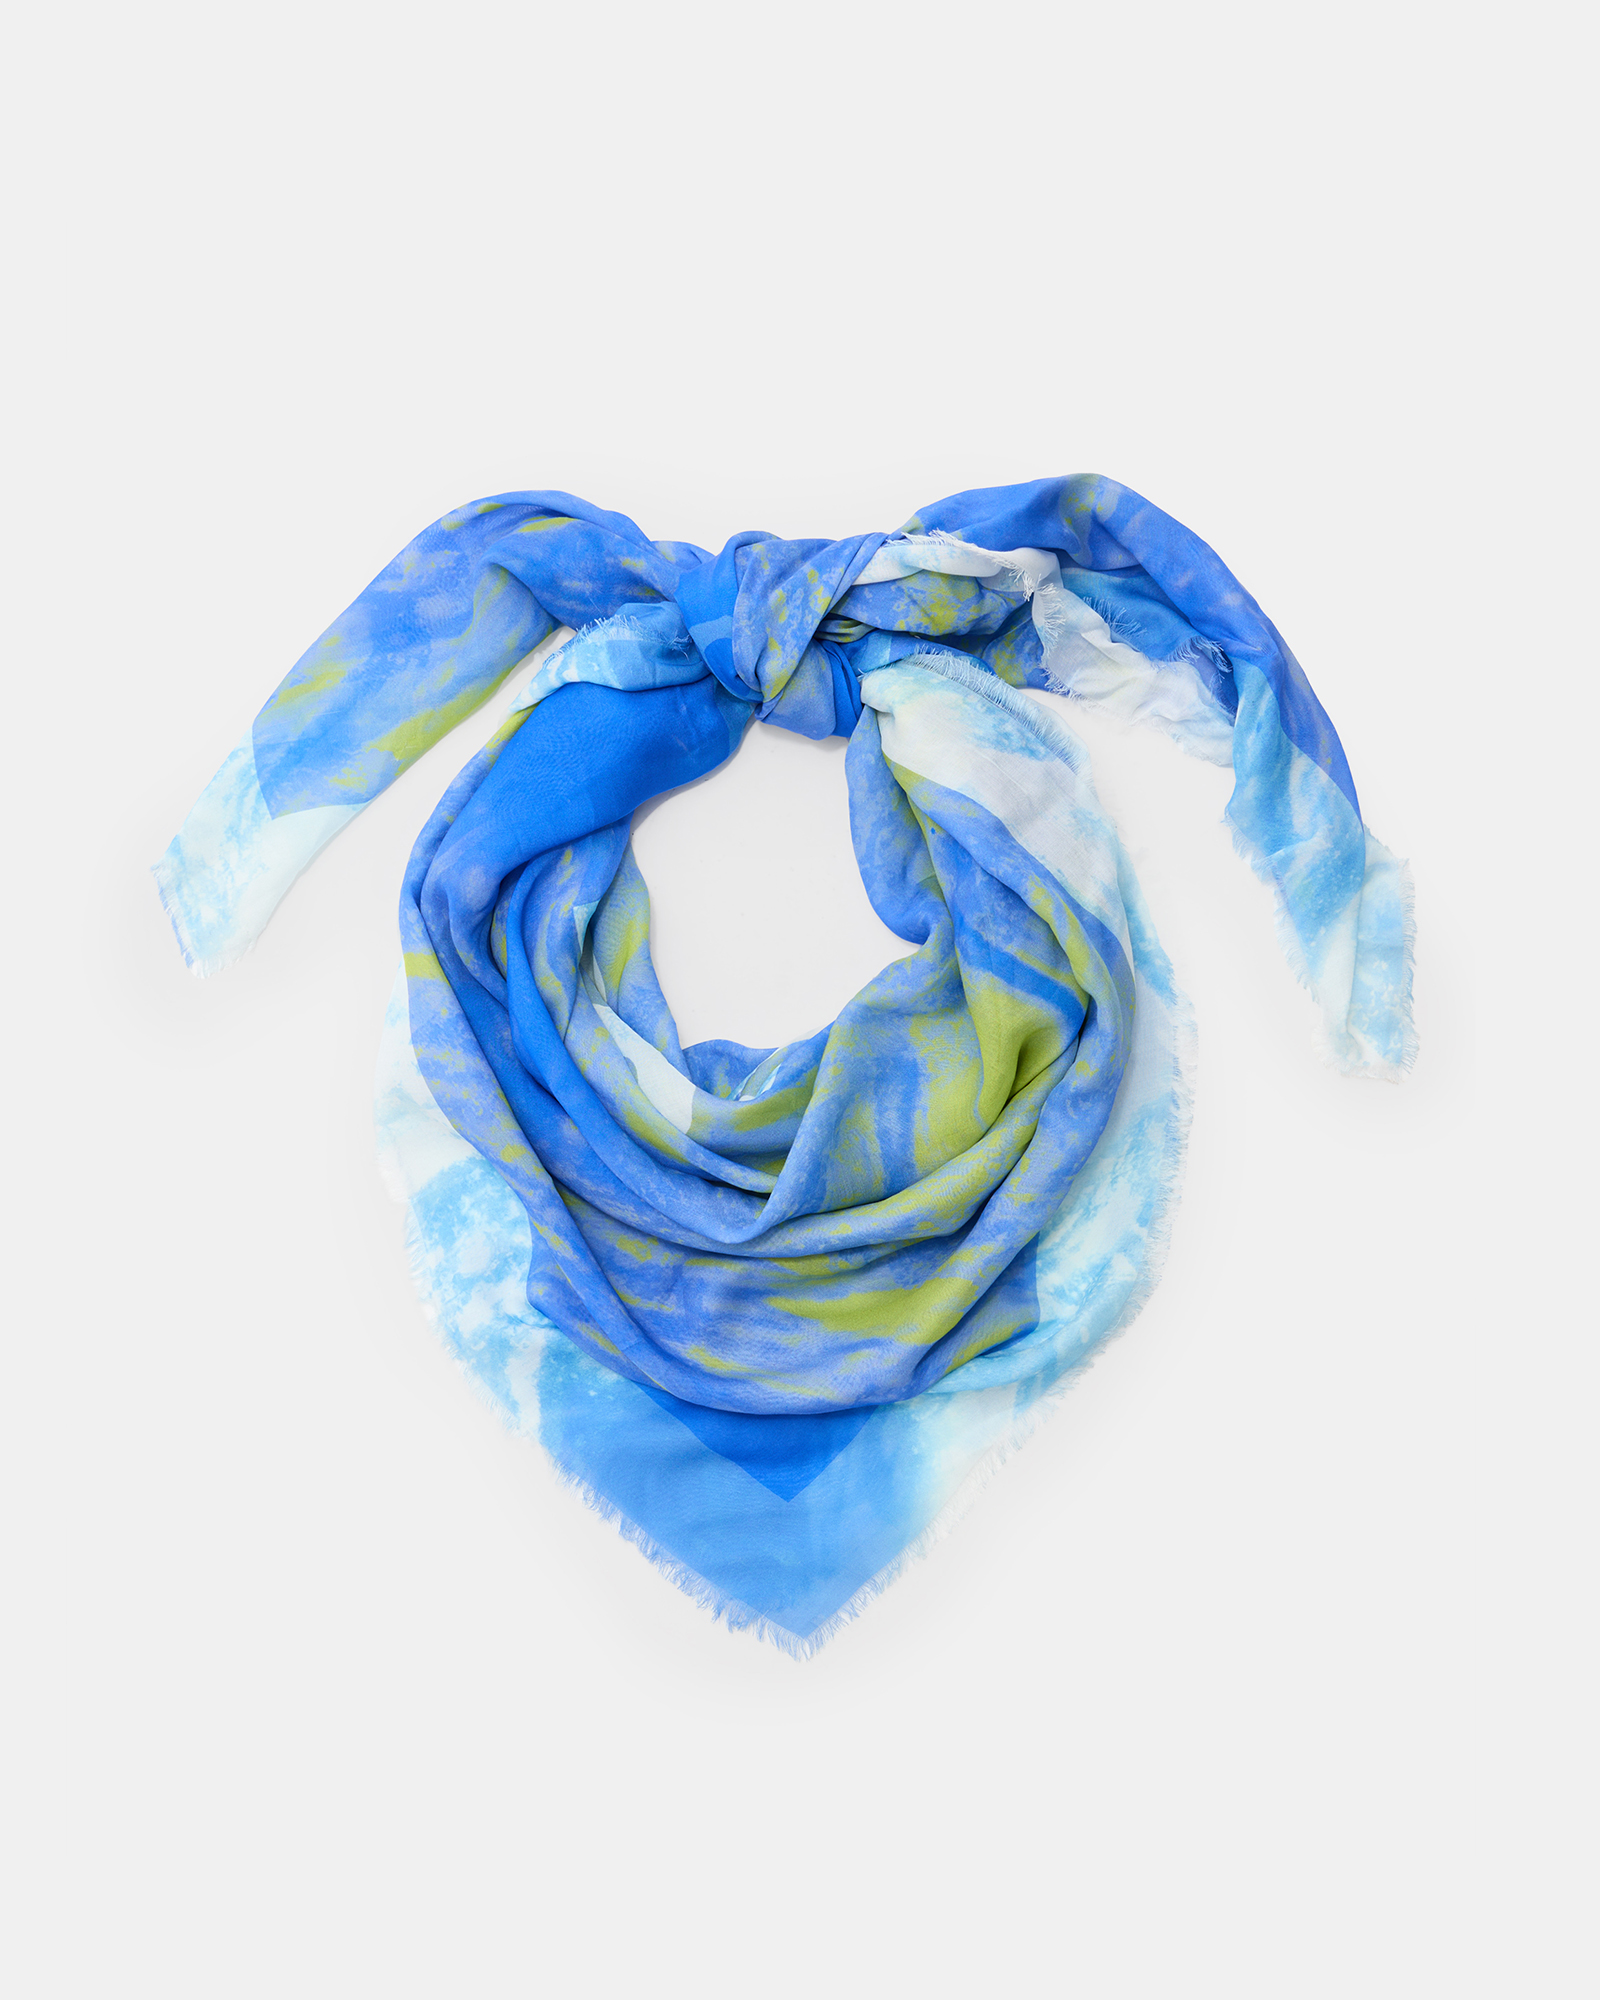 AllSaints Inspiral Large Square Scarf,, ELECTRIC BLUE